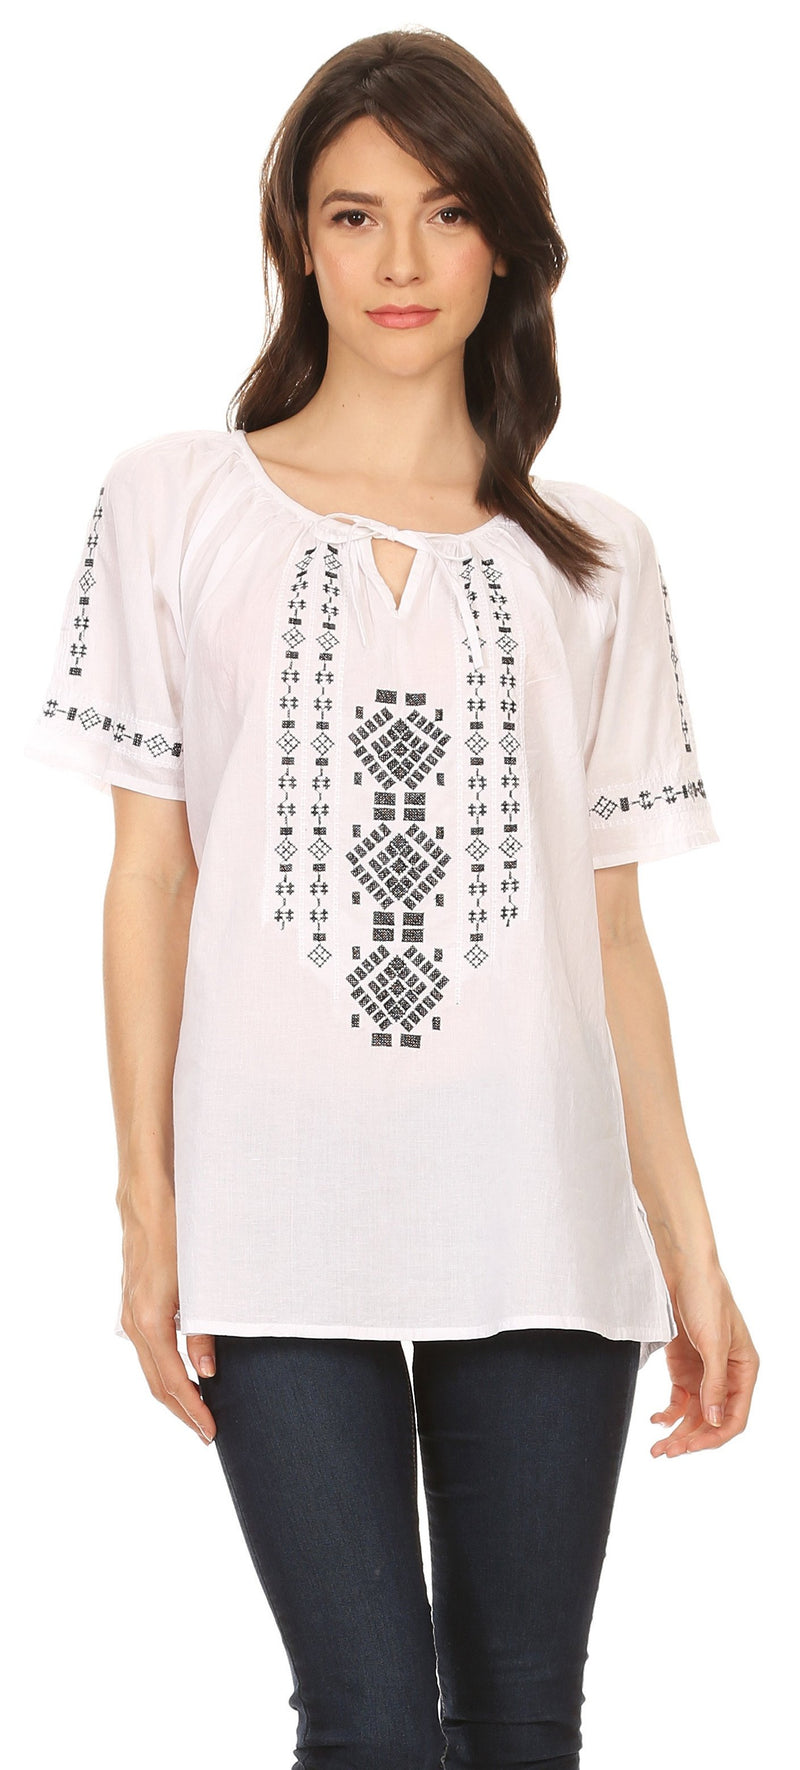 Sakkas Lena Cross Stitch Embroidered Short Sleeve  Casual Top Blouse